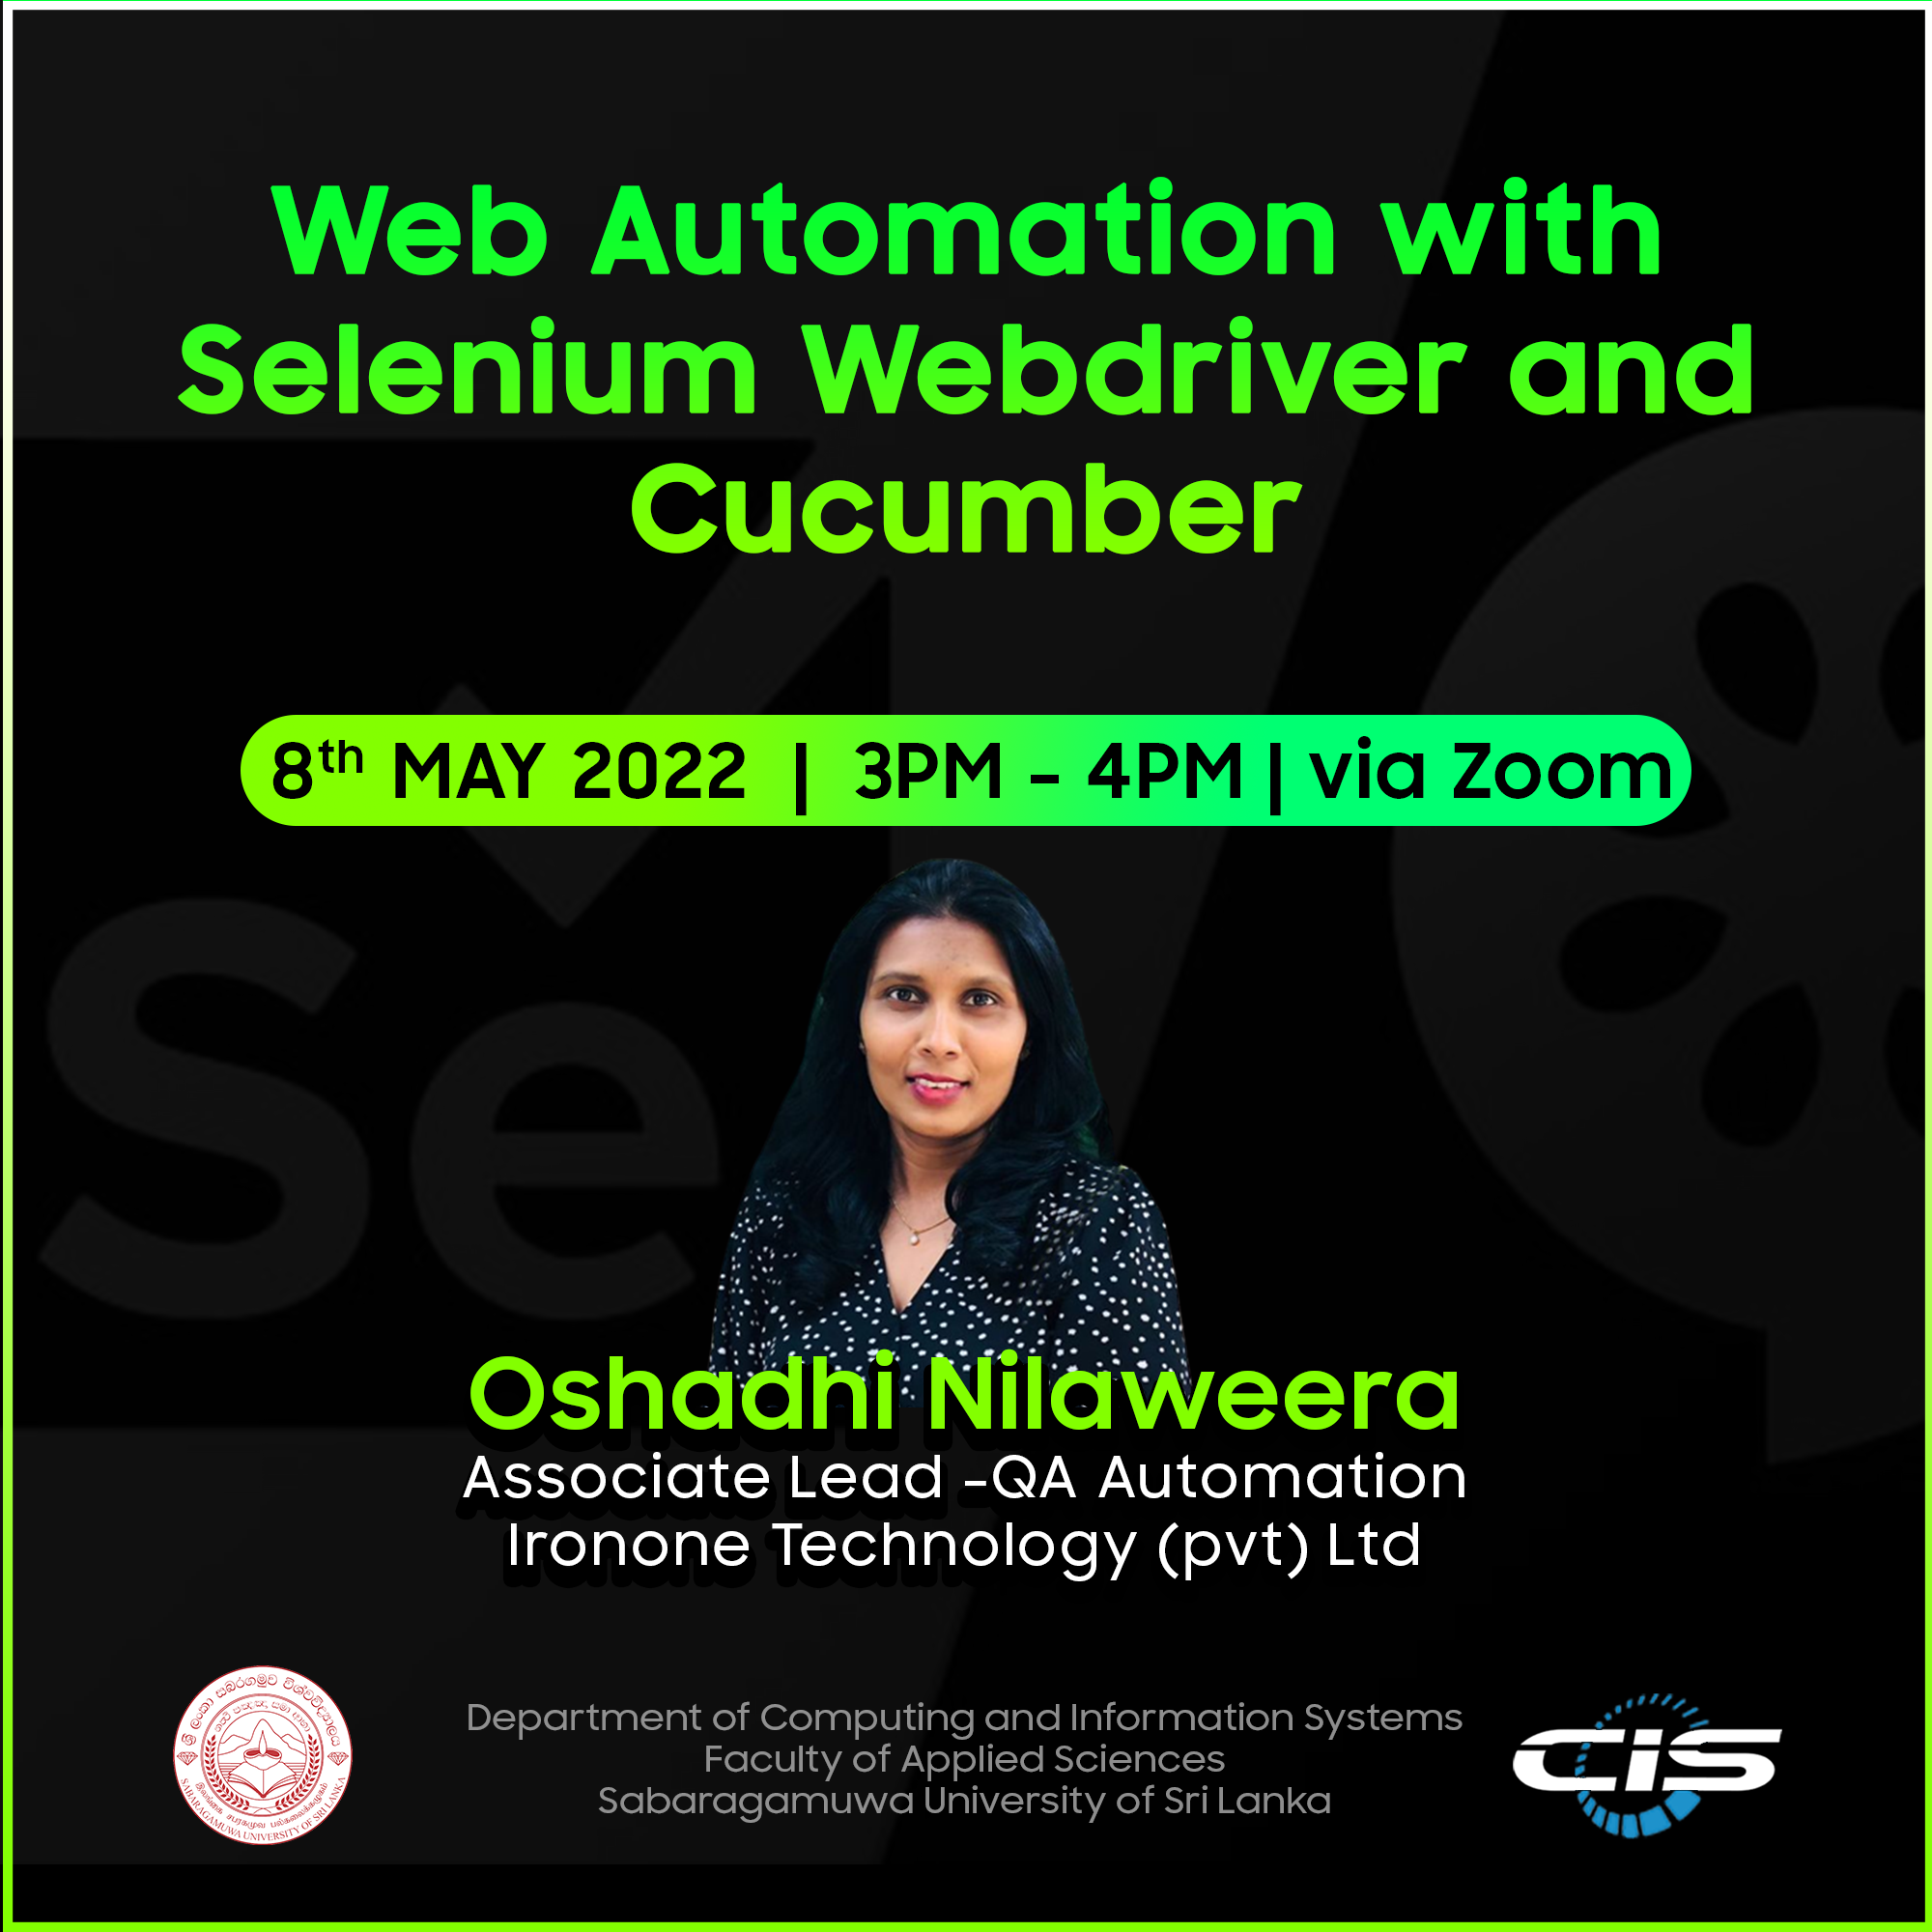 Webinar: Web Automation with Selenium Webdriver and Cucumber